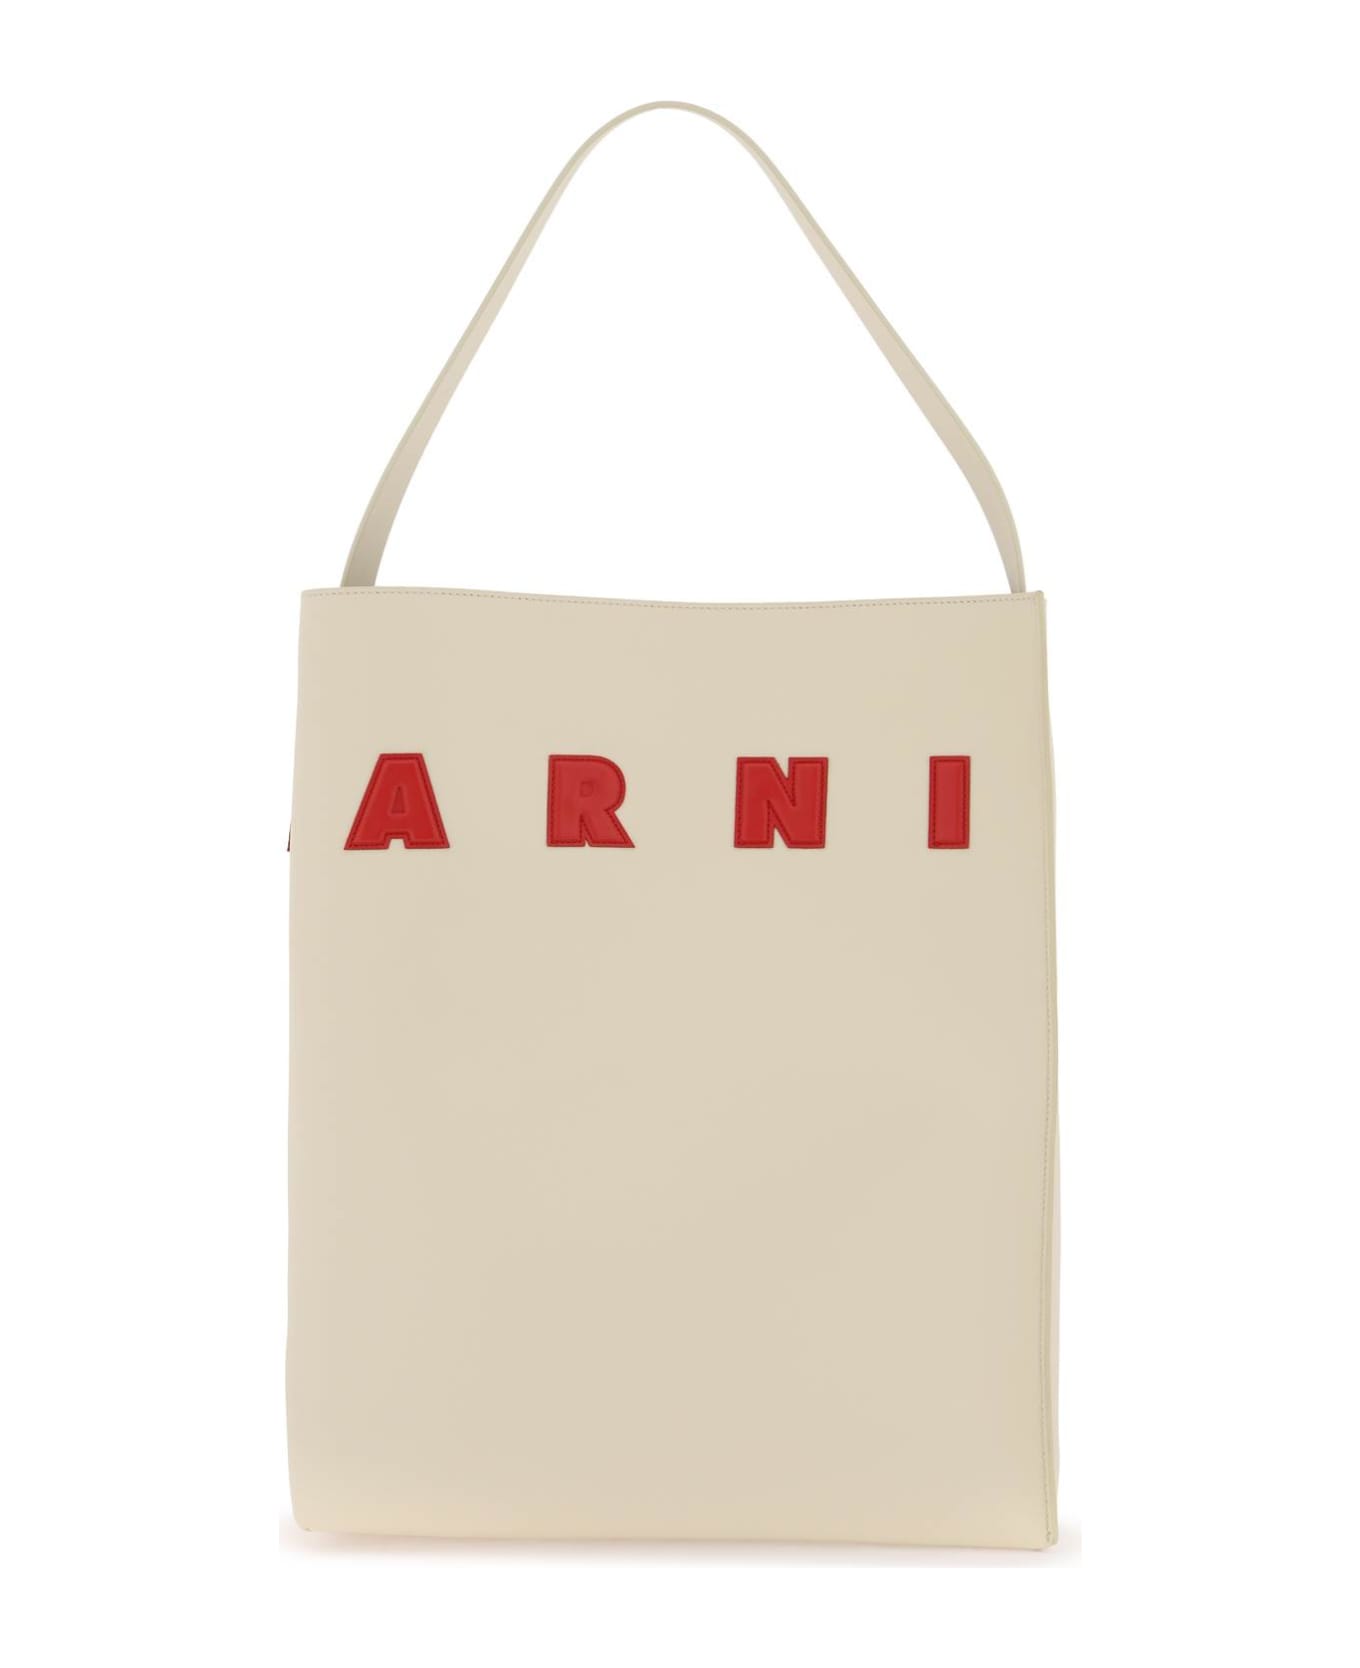 Marni Museo Hobo Bag - IVORY LACQUER (White)